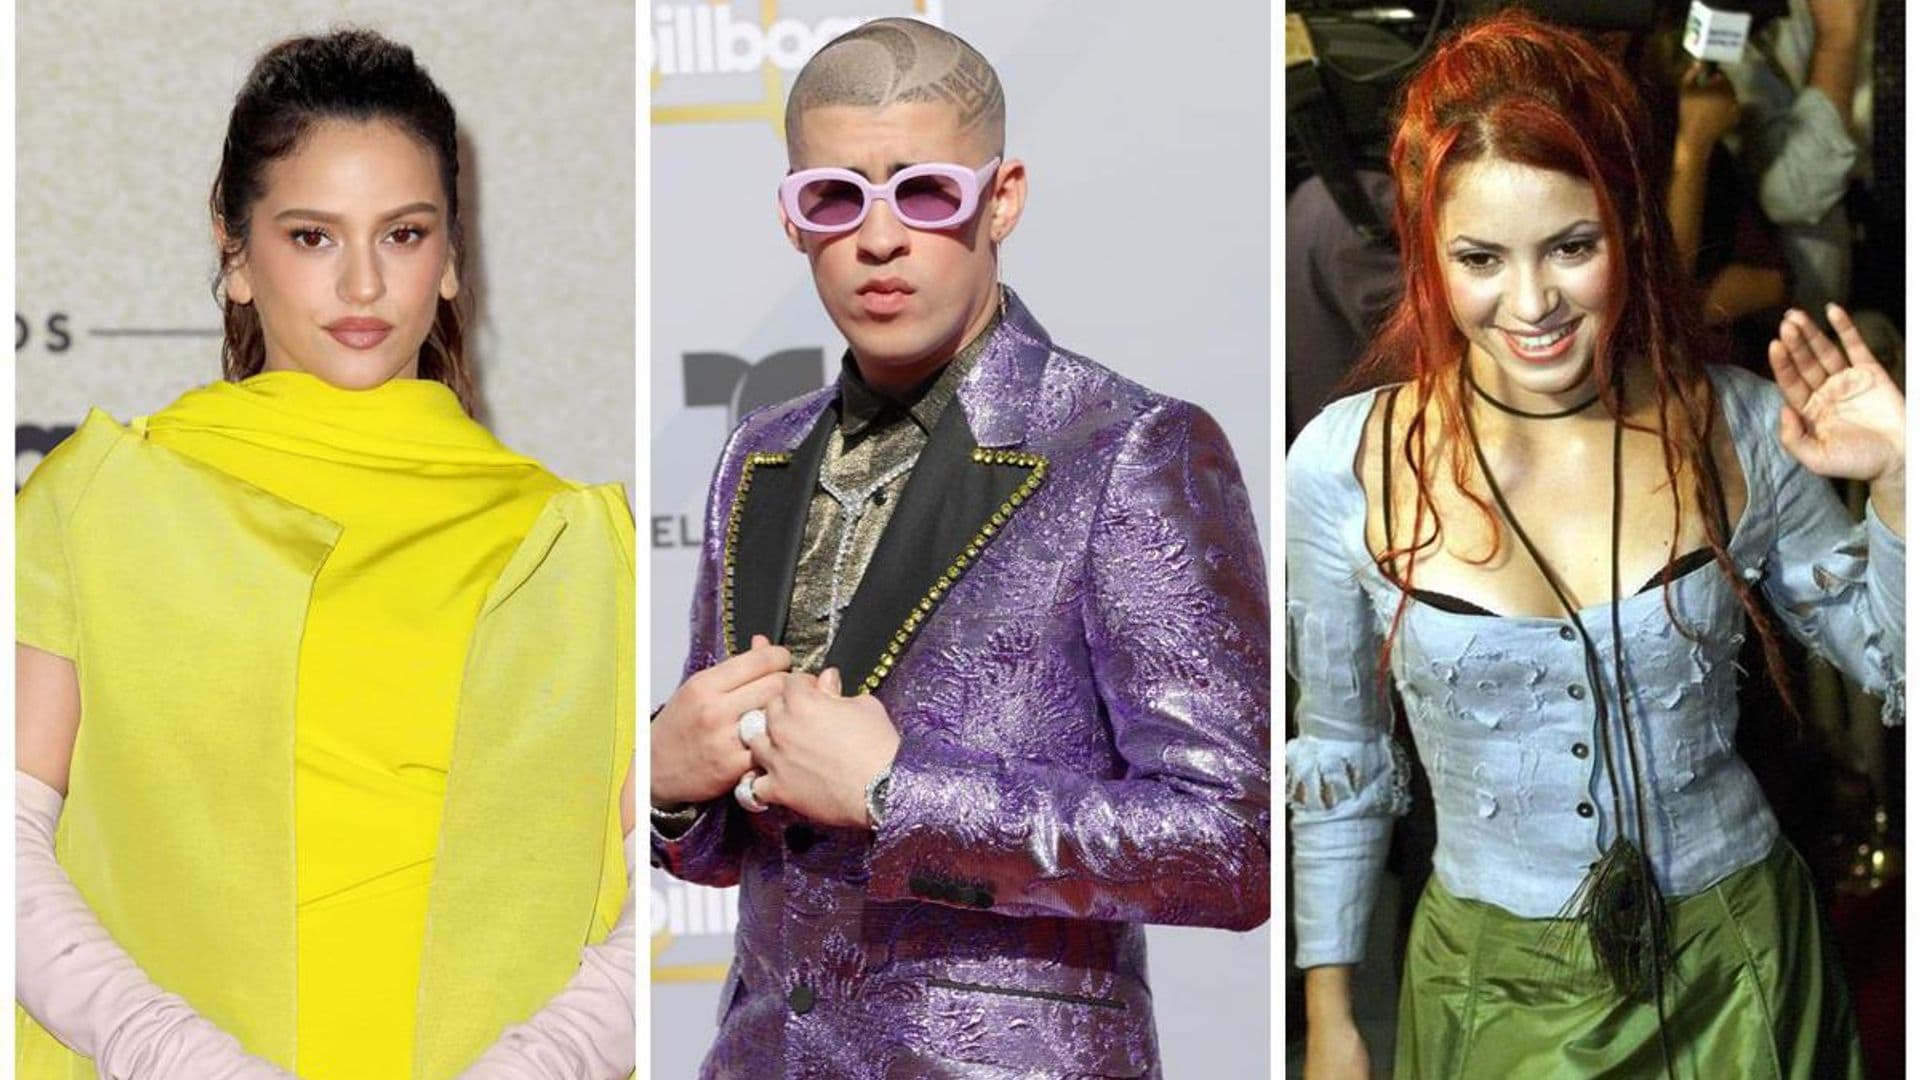 Billboard Latin Music Awards: The most iconic outfits over the years